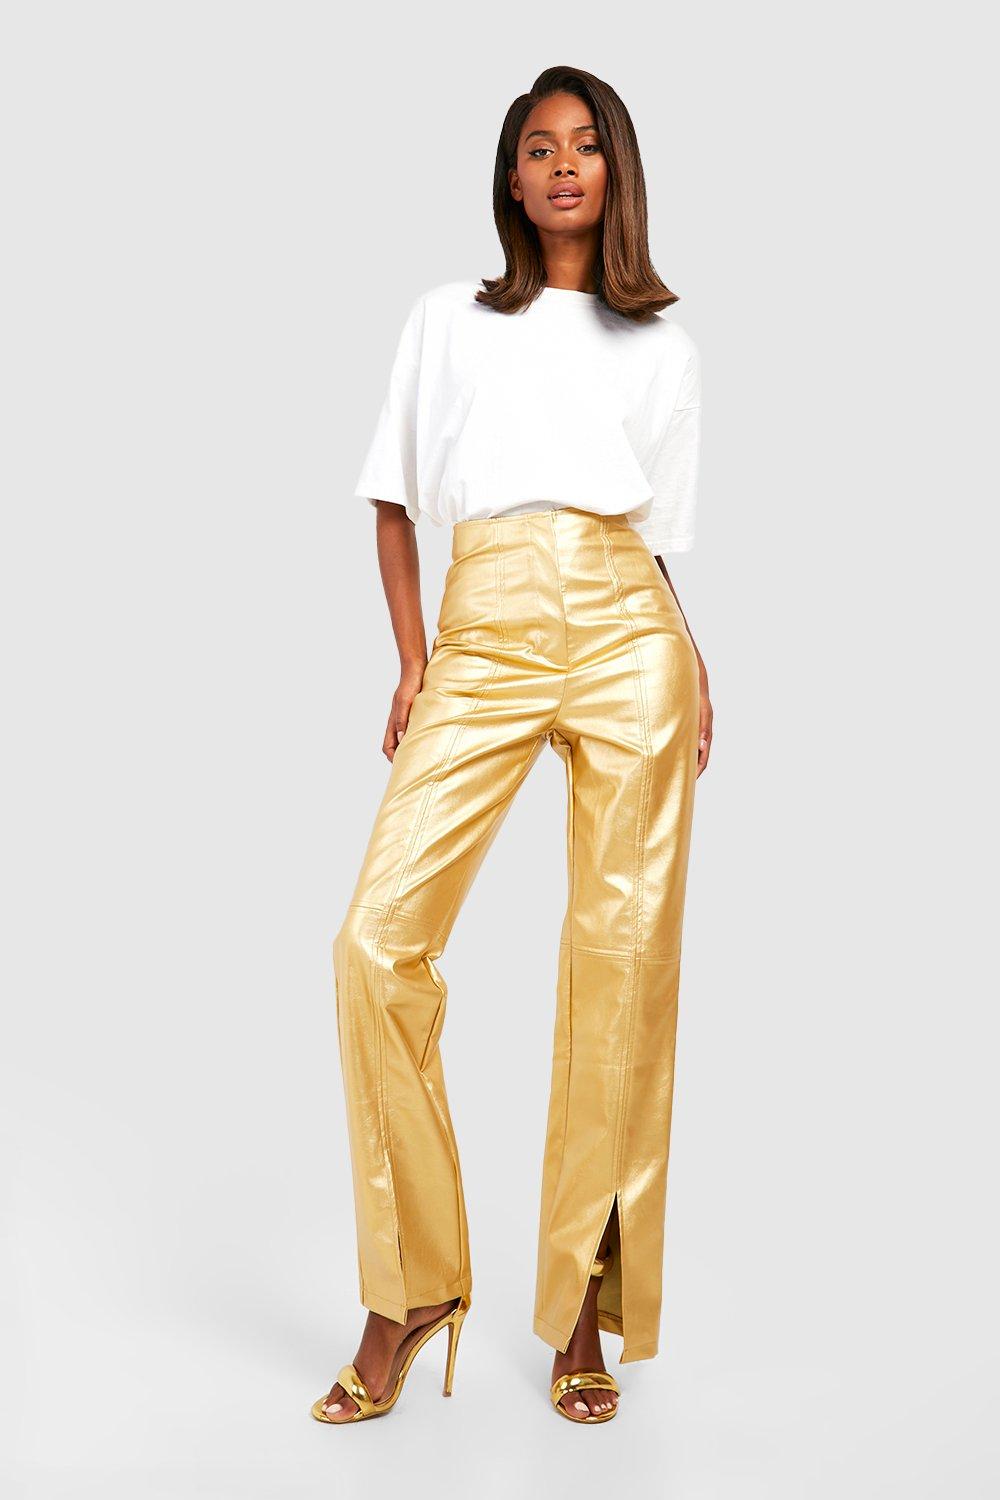 Buy FableStreet Orange And Gold Silk Brocade Trousers online